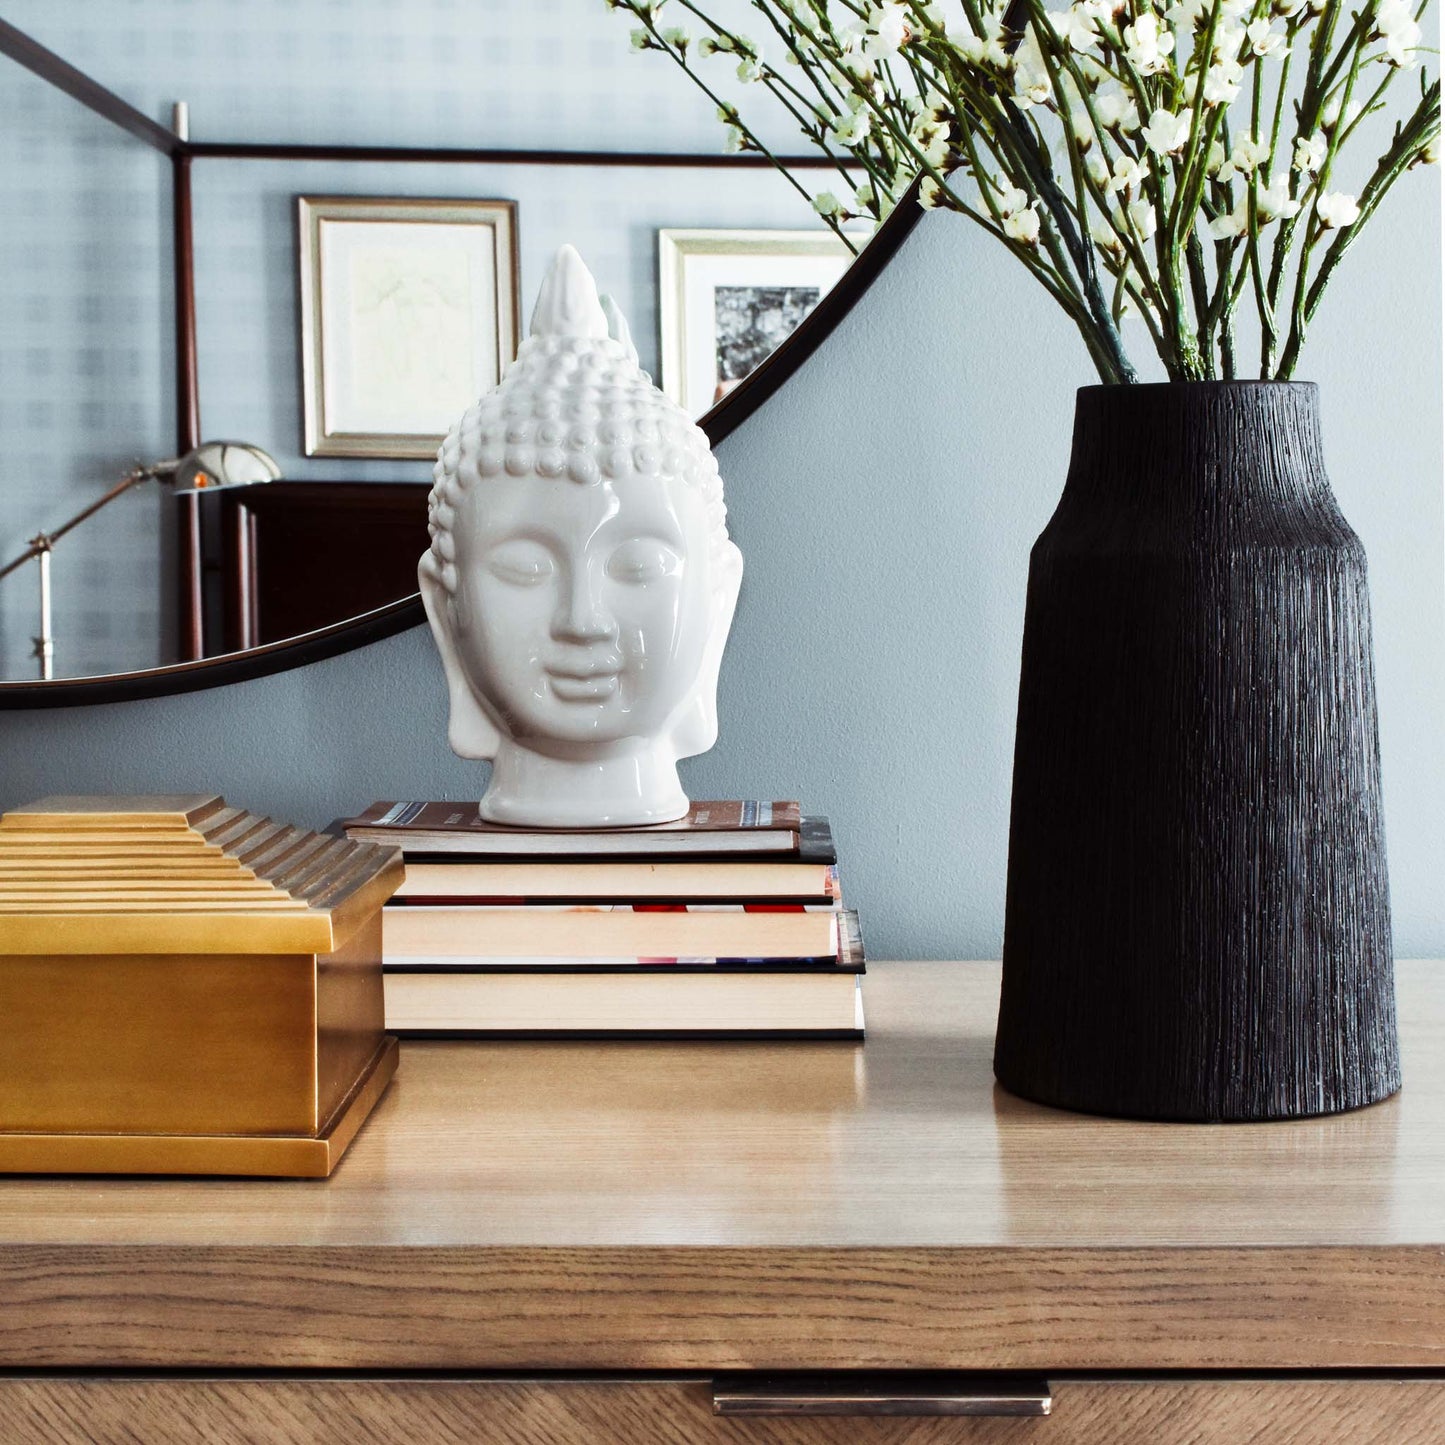 Matte black textured base with cherry blossom branches, brass pyramid box, and Buddha bust on stack of books.